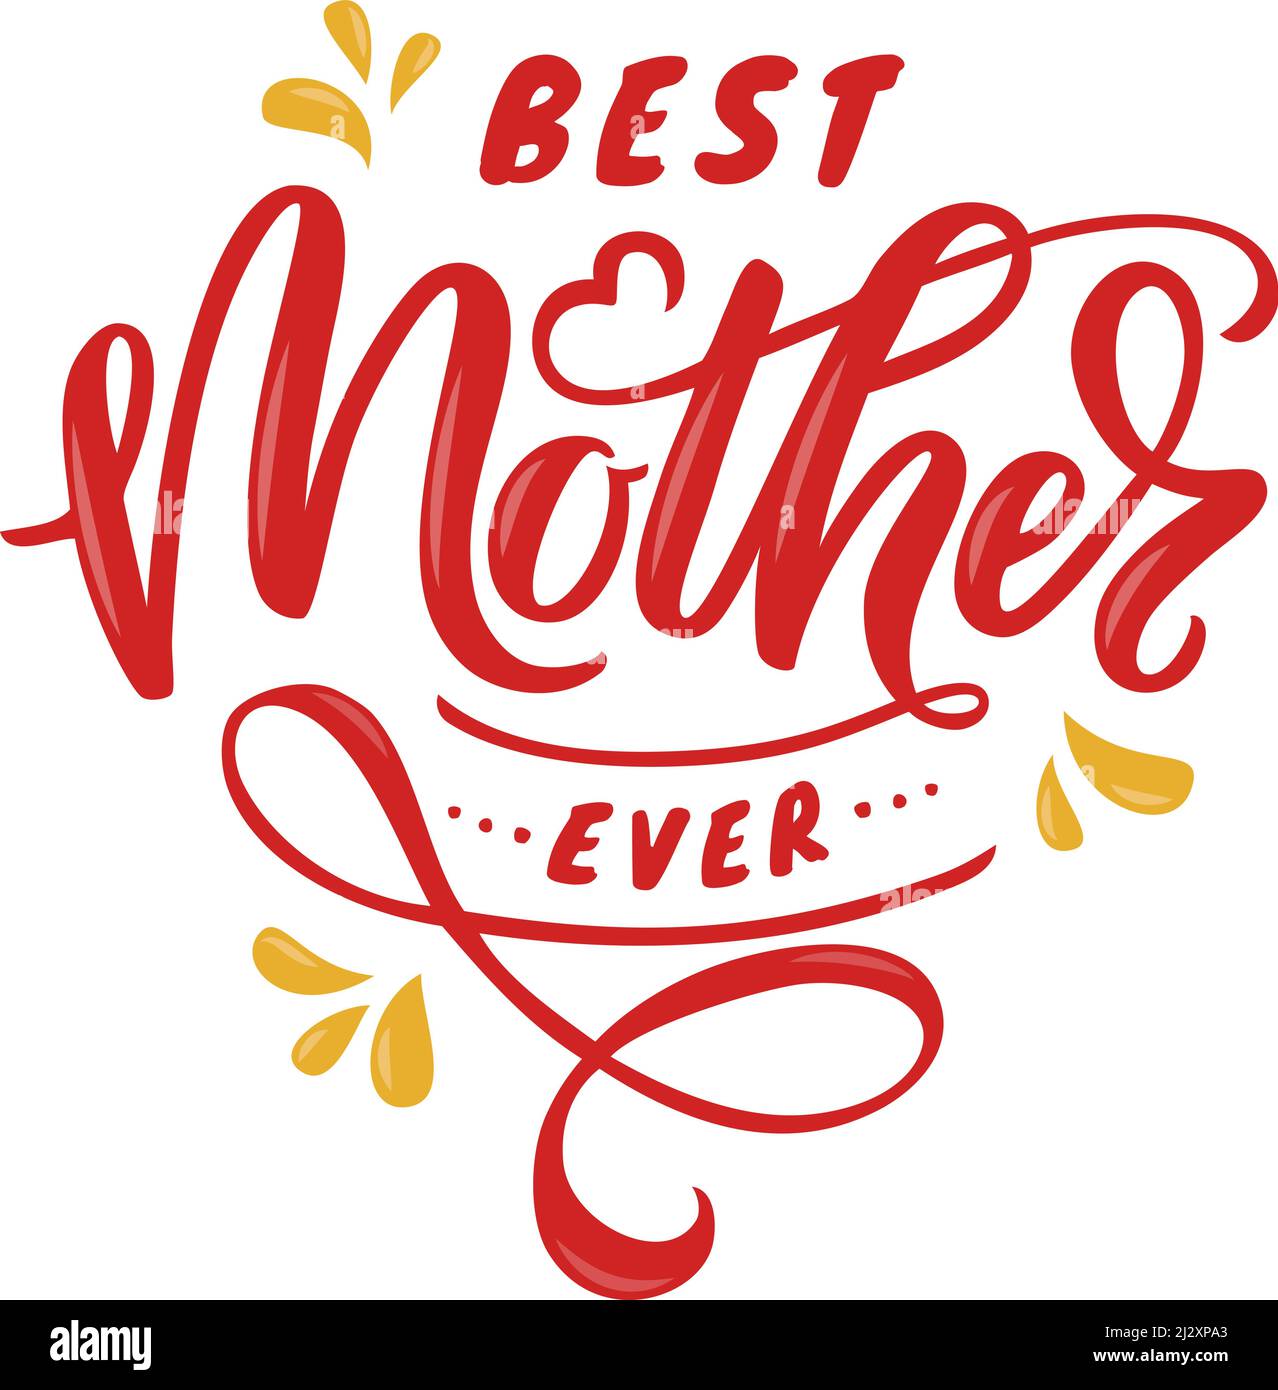 Best Mother ever - hand lettering. Colorful illustration of quote isolated on white background. Vector design. Stock Vector